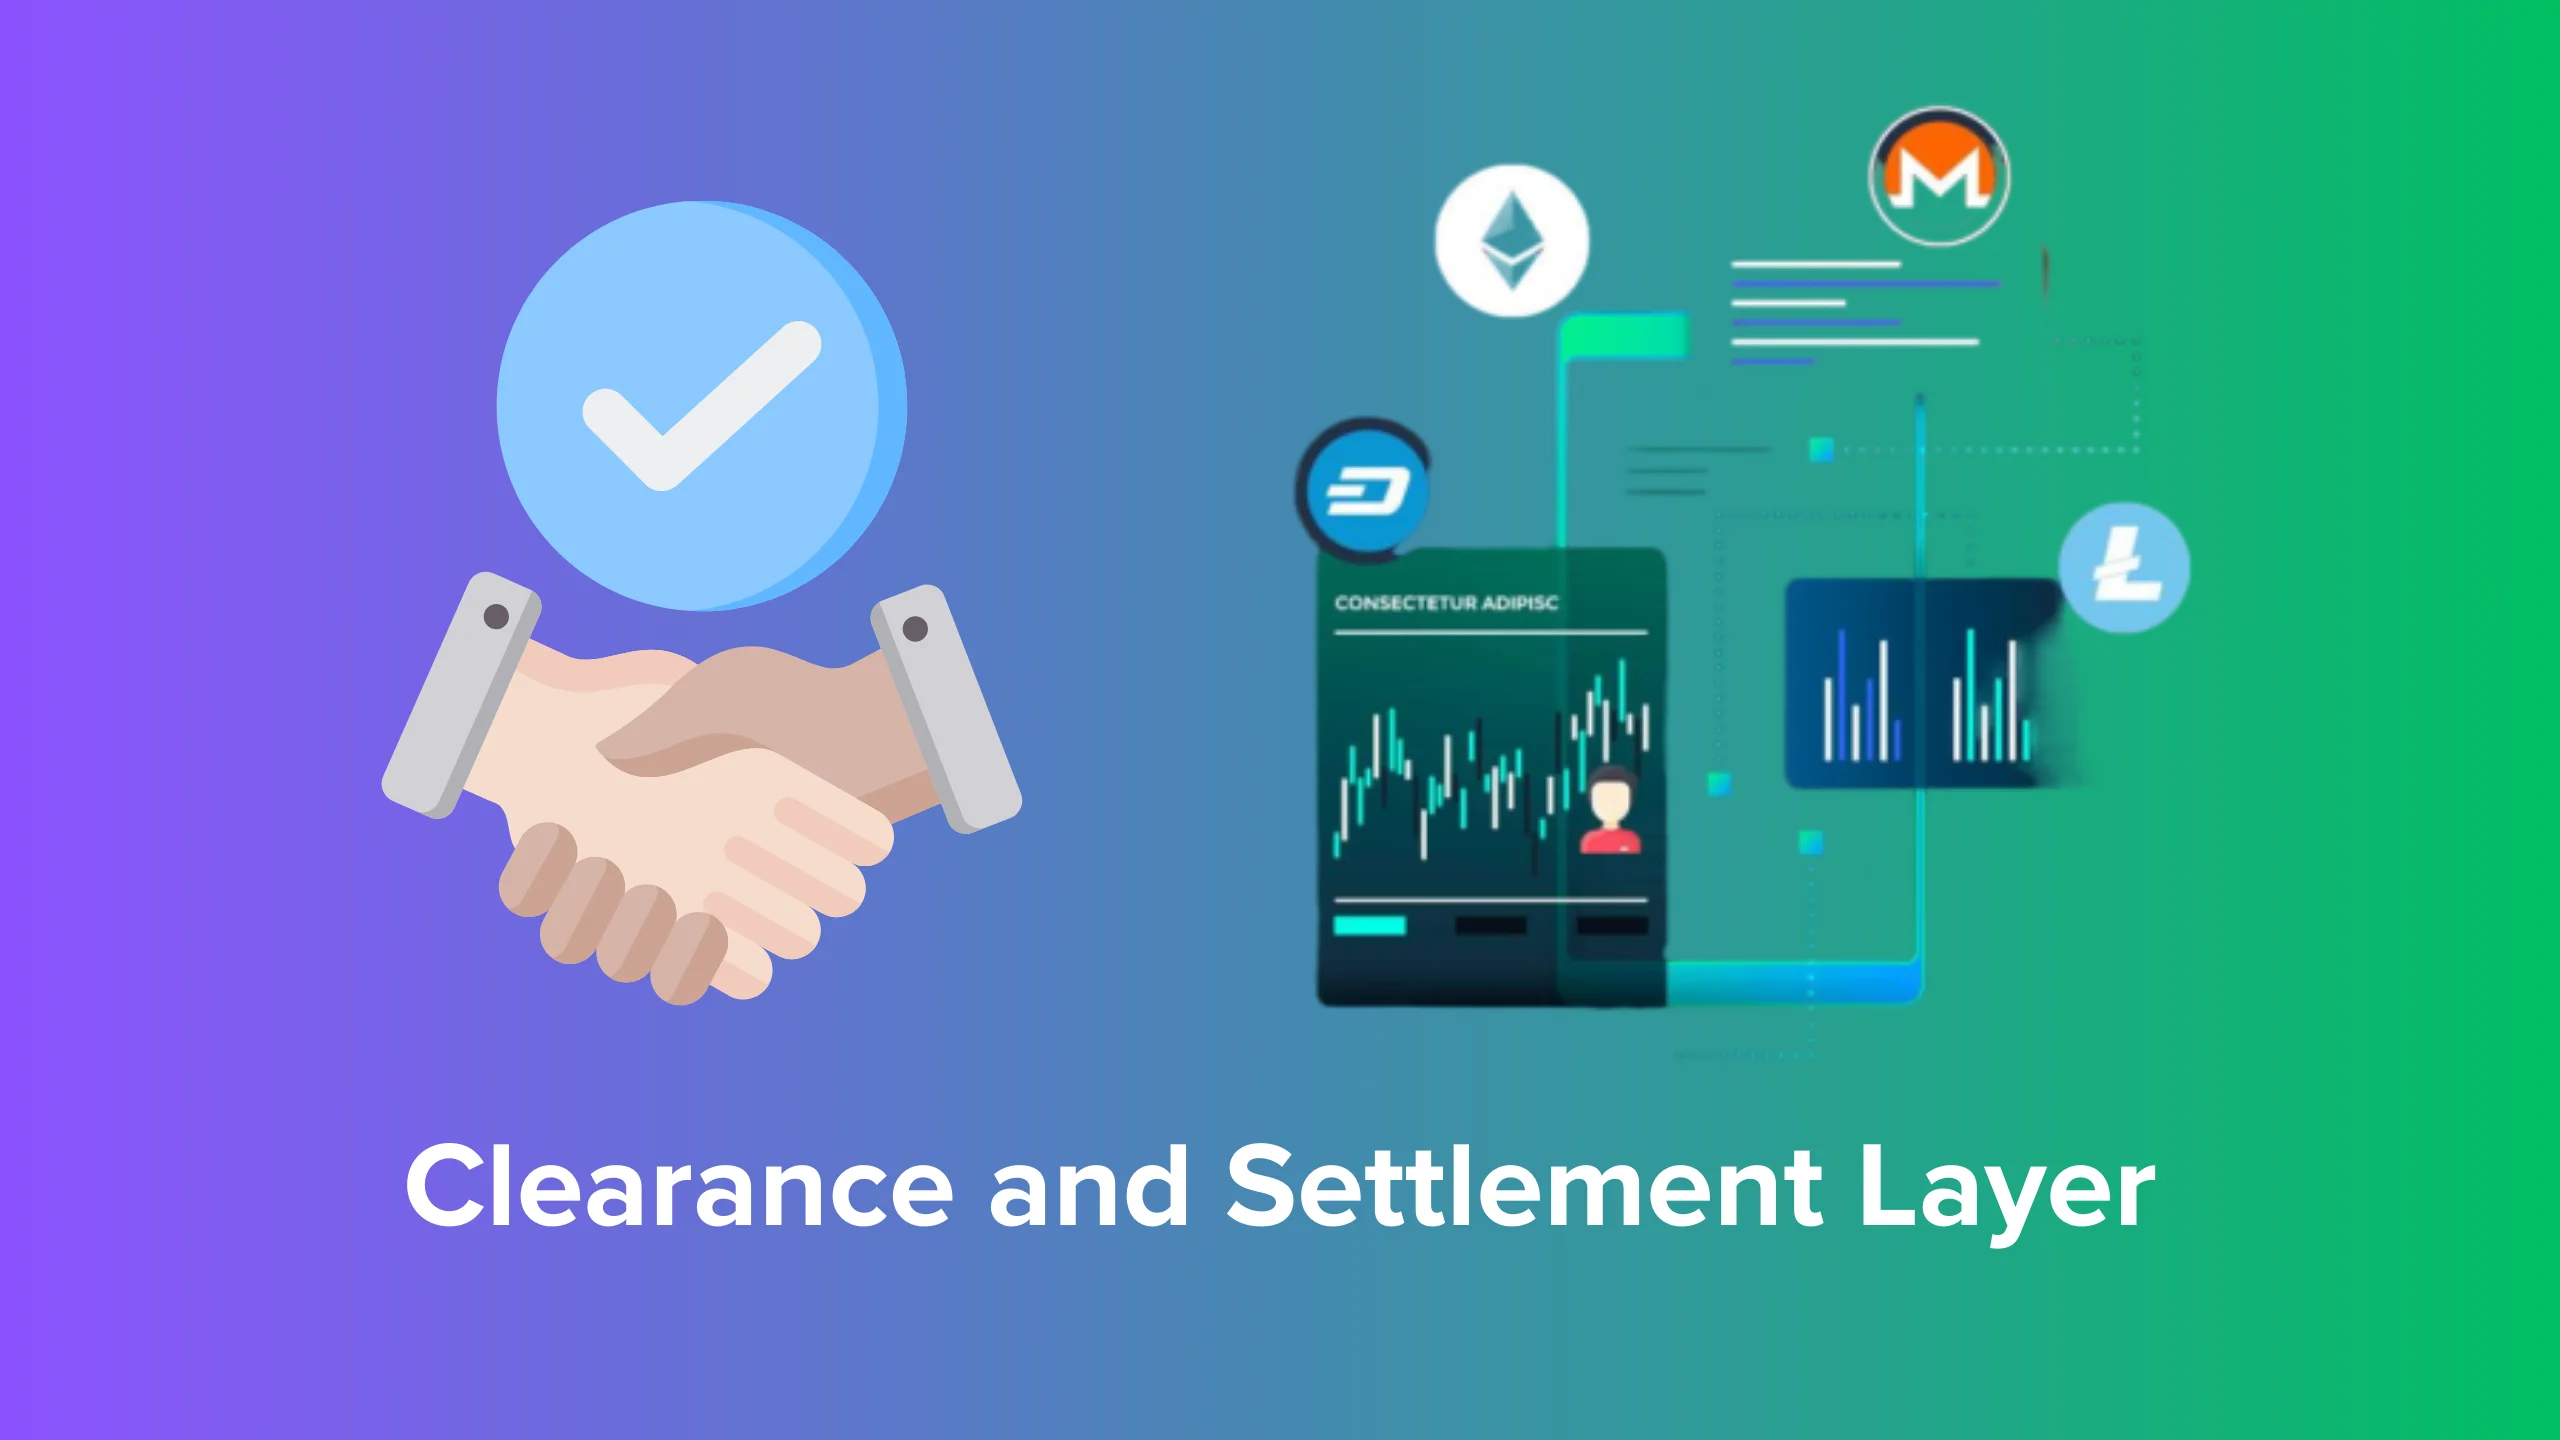 Diagram illustrating the clearance and settlement layer in a DeFi exchange platform.